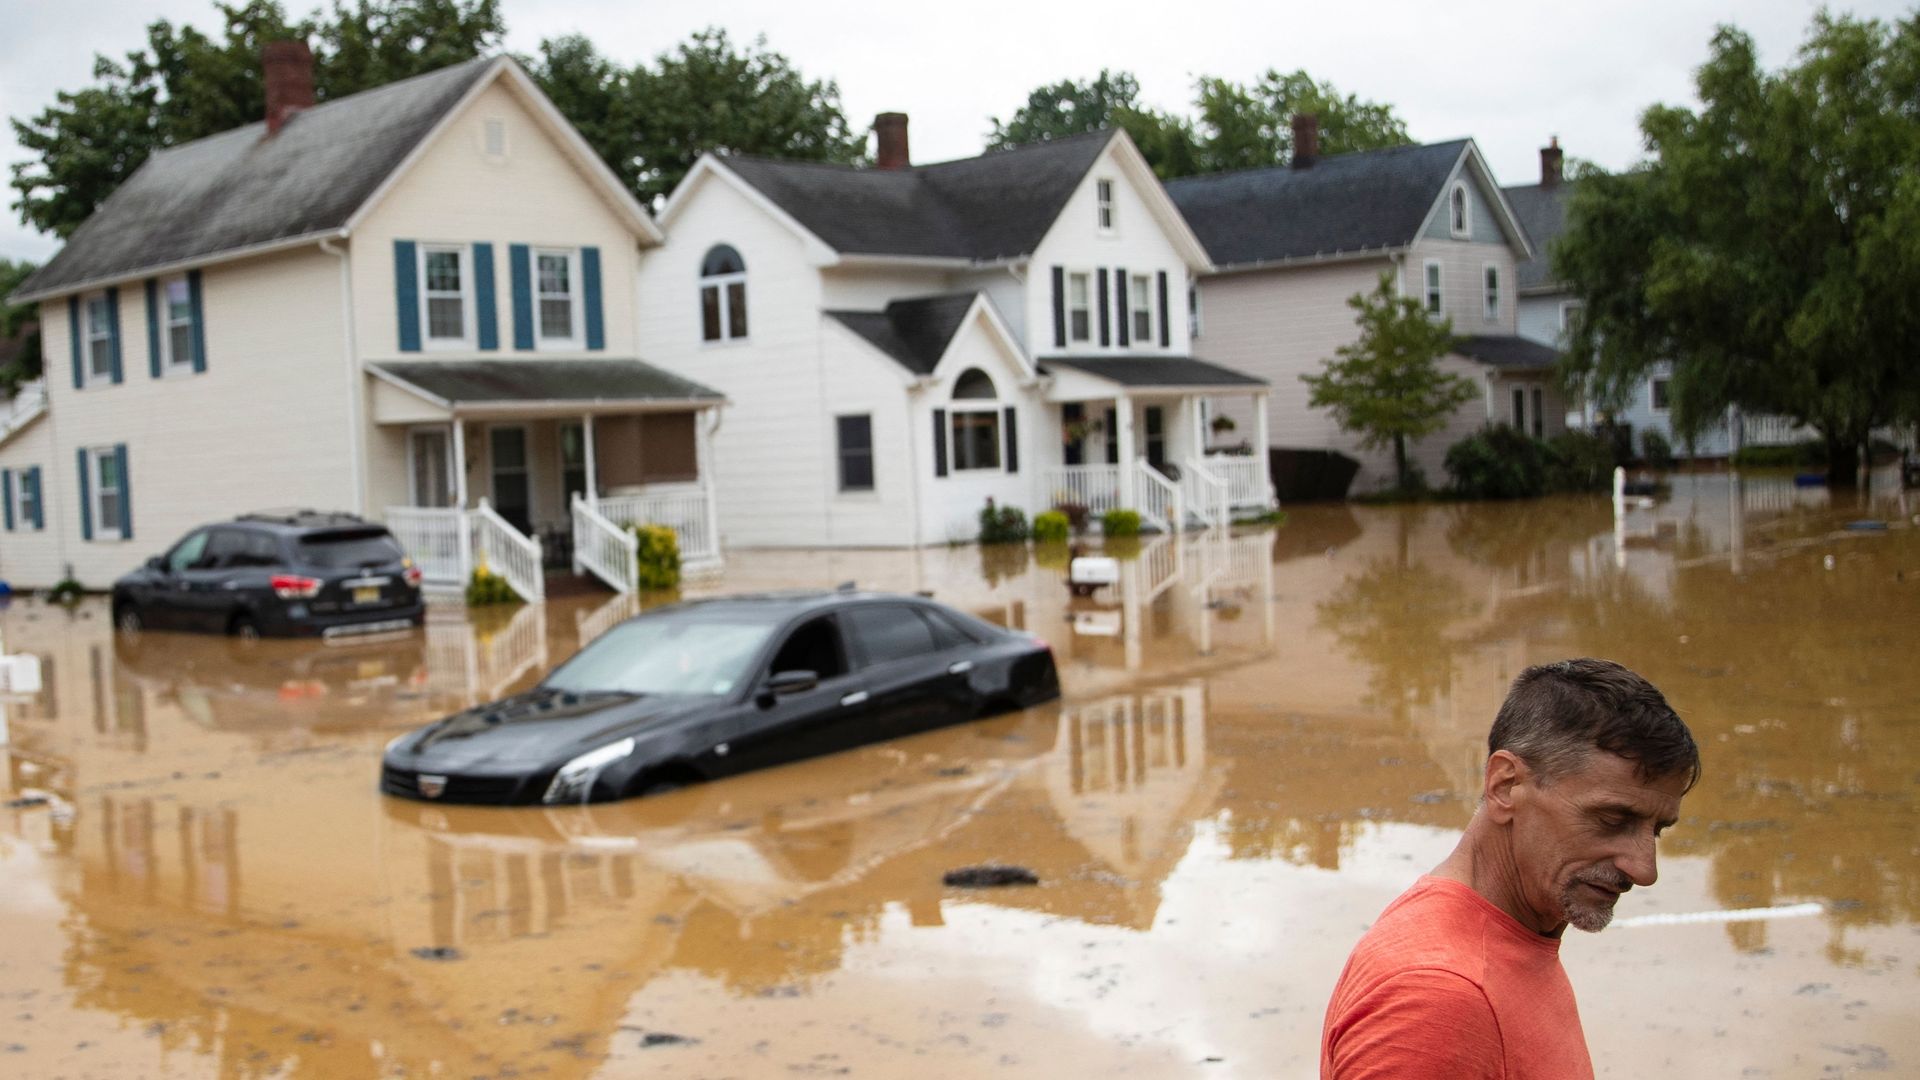 Bruce, an evacuated resident, wades through high water following a flash flood, as Tropical Storm Henri makes landfall, in Helmetta, New Jersey, on August 22